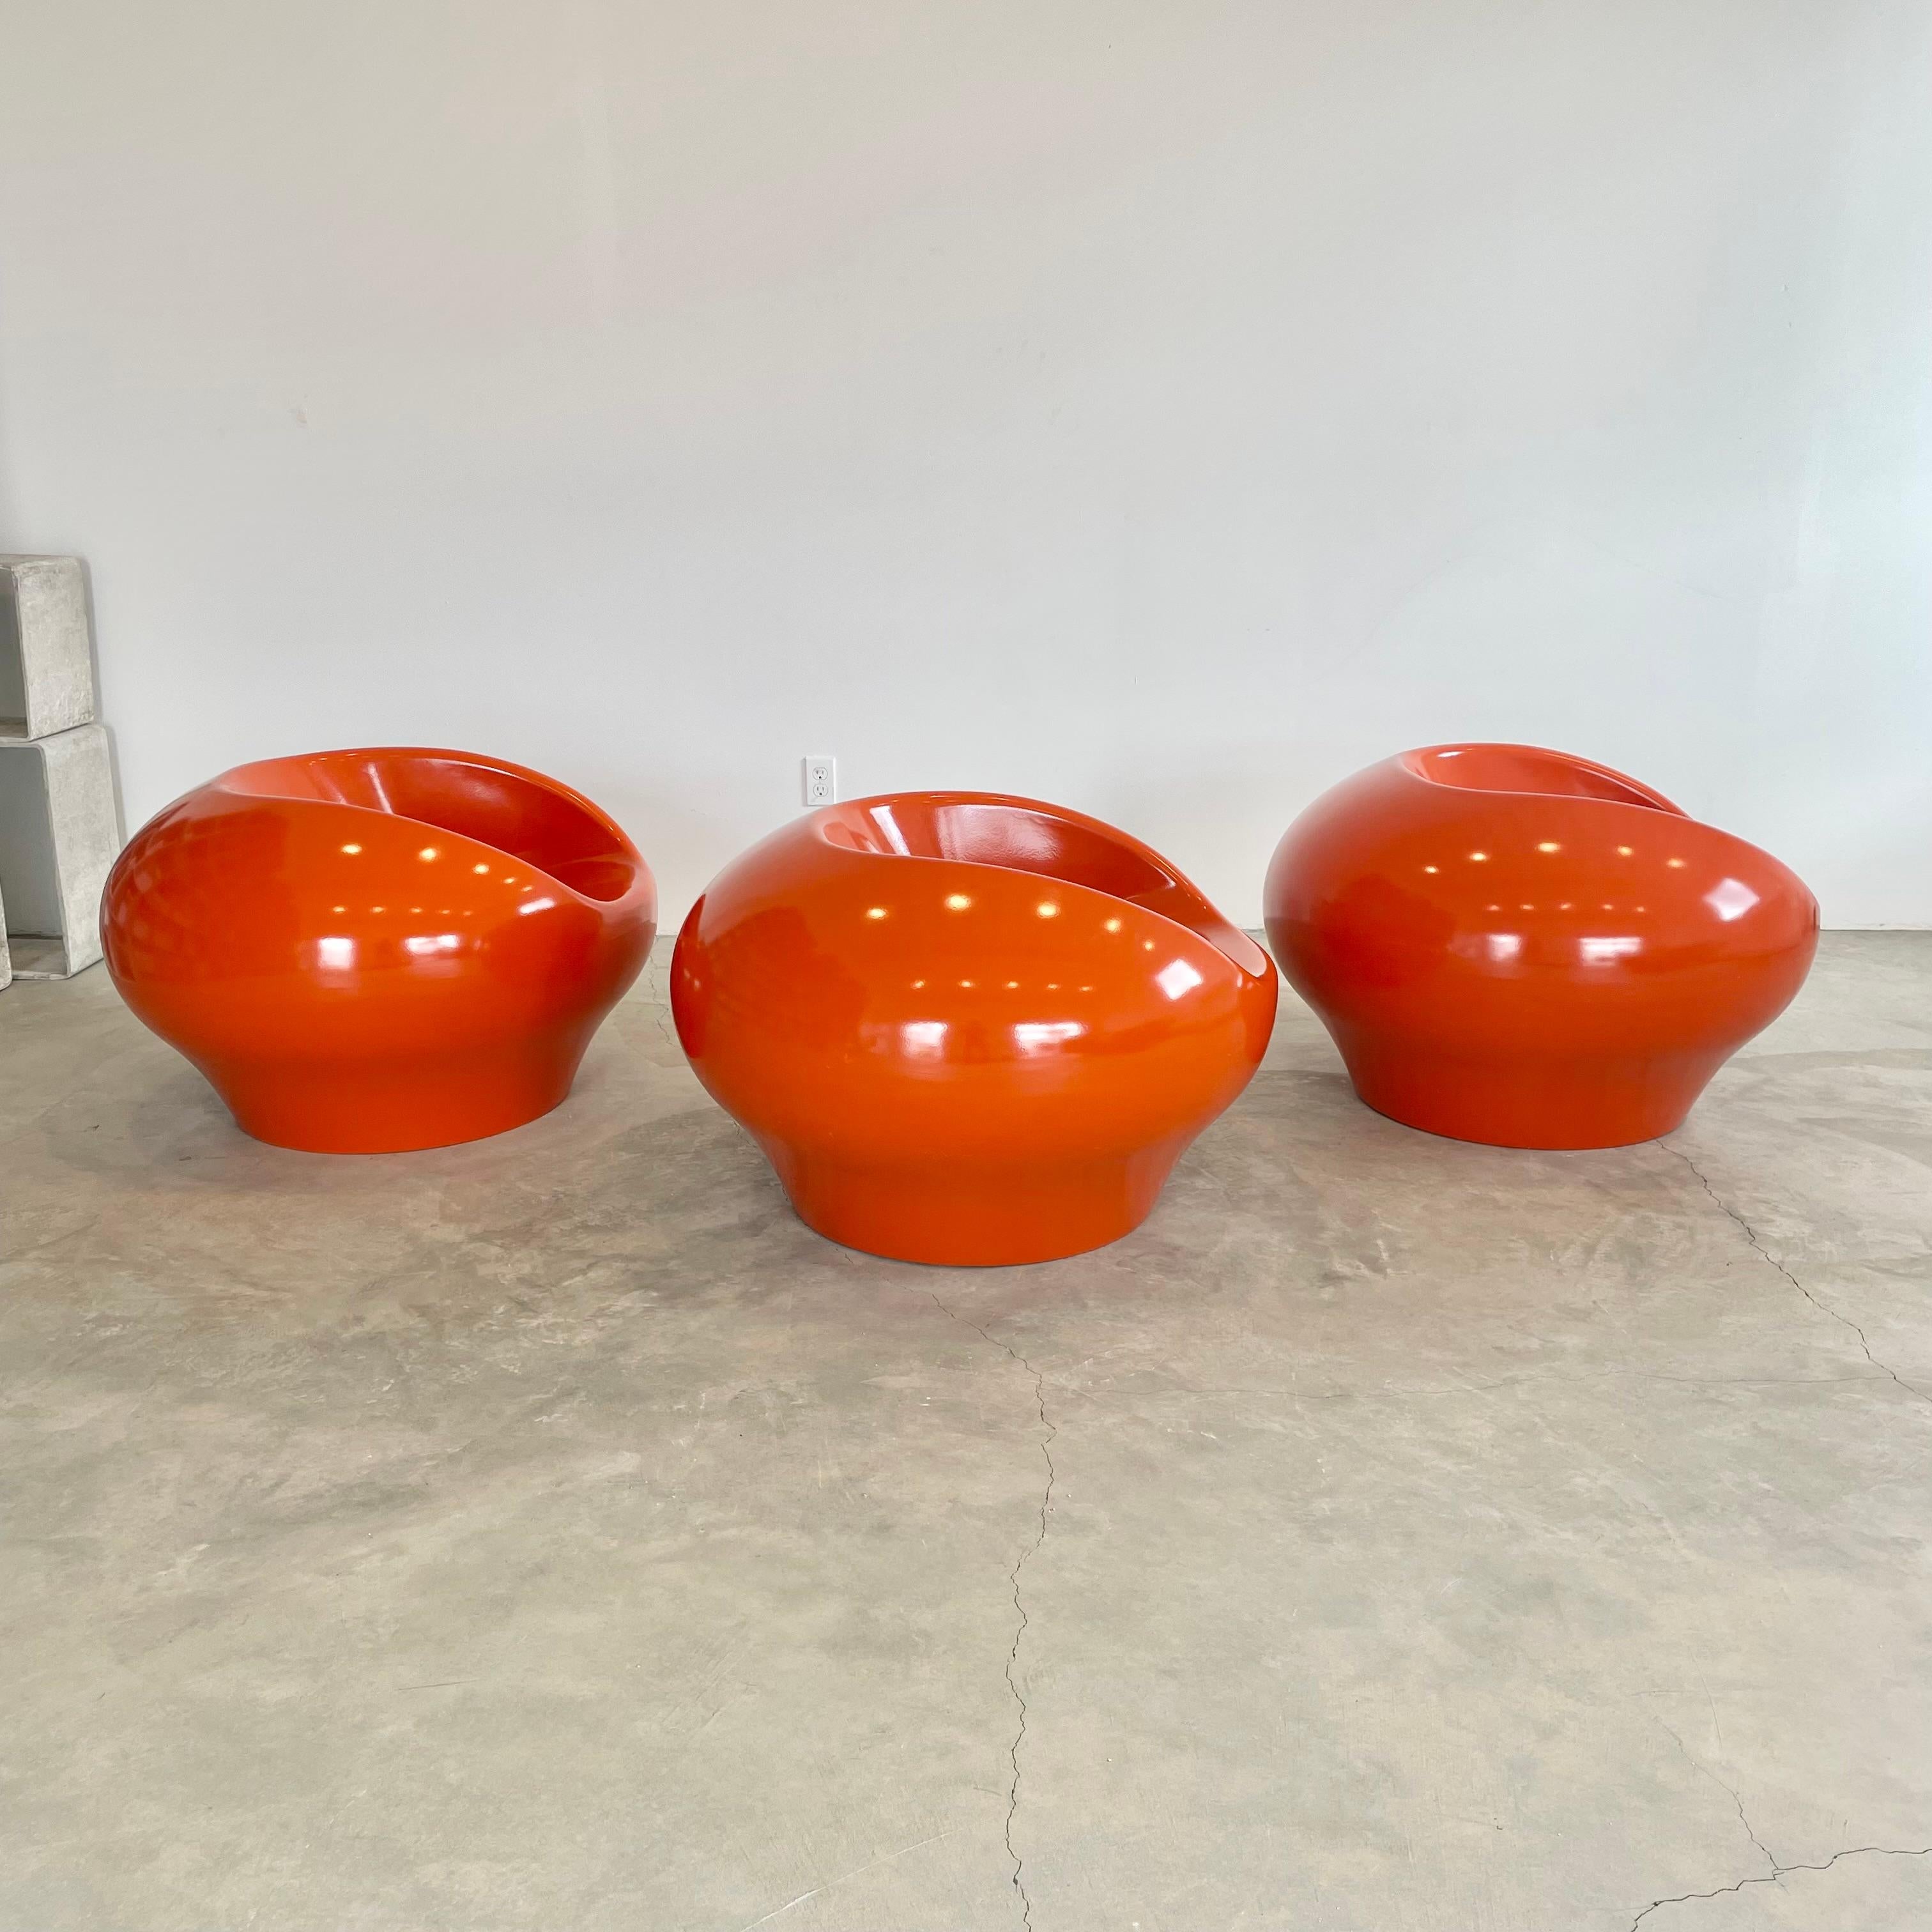 Hand-Crafted Set of 3 Prototype Fiberglass Chairs in the Style of Eero Aarnio, 1970s, Finland For Sale